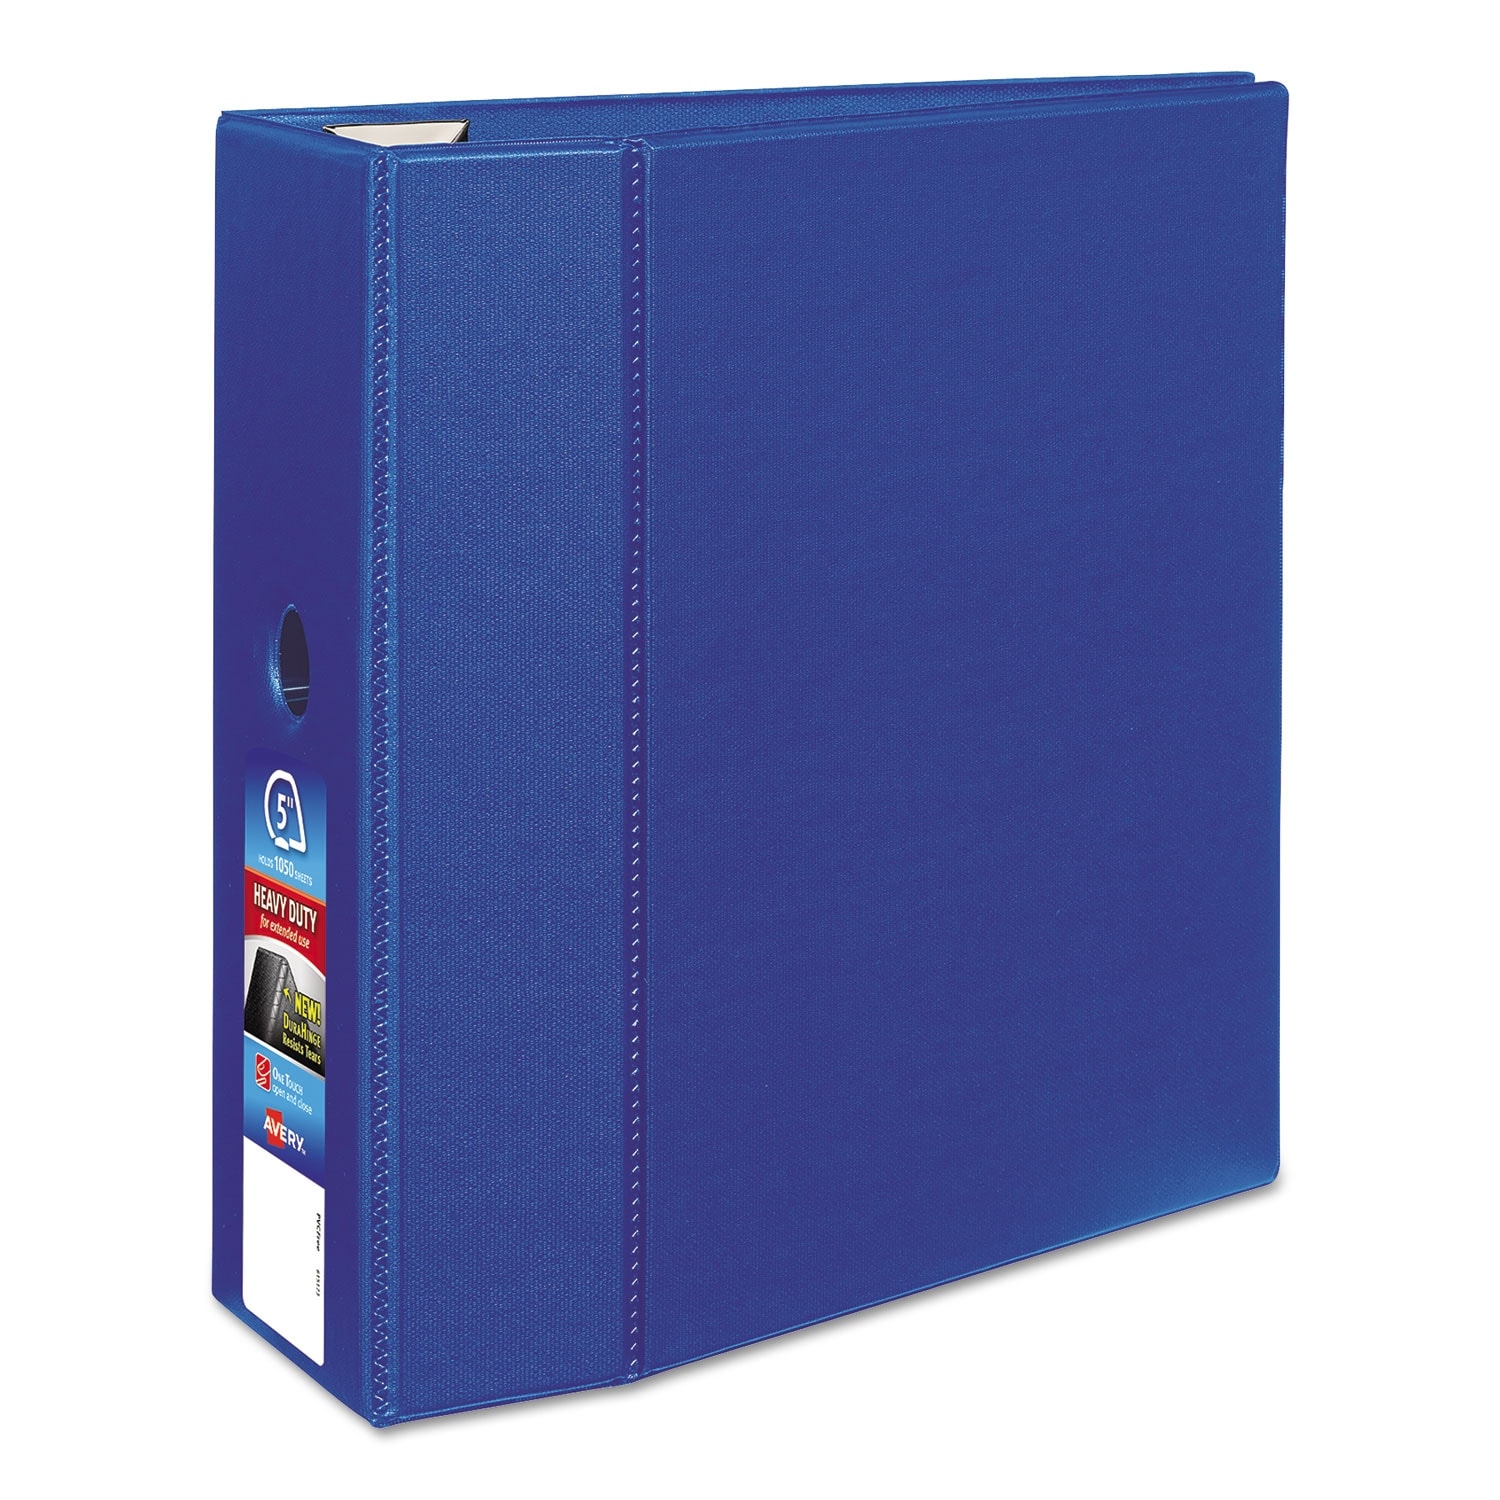 Heavy-Duty Non-View Binder, 3 Rings, 5